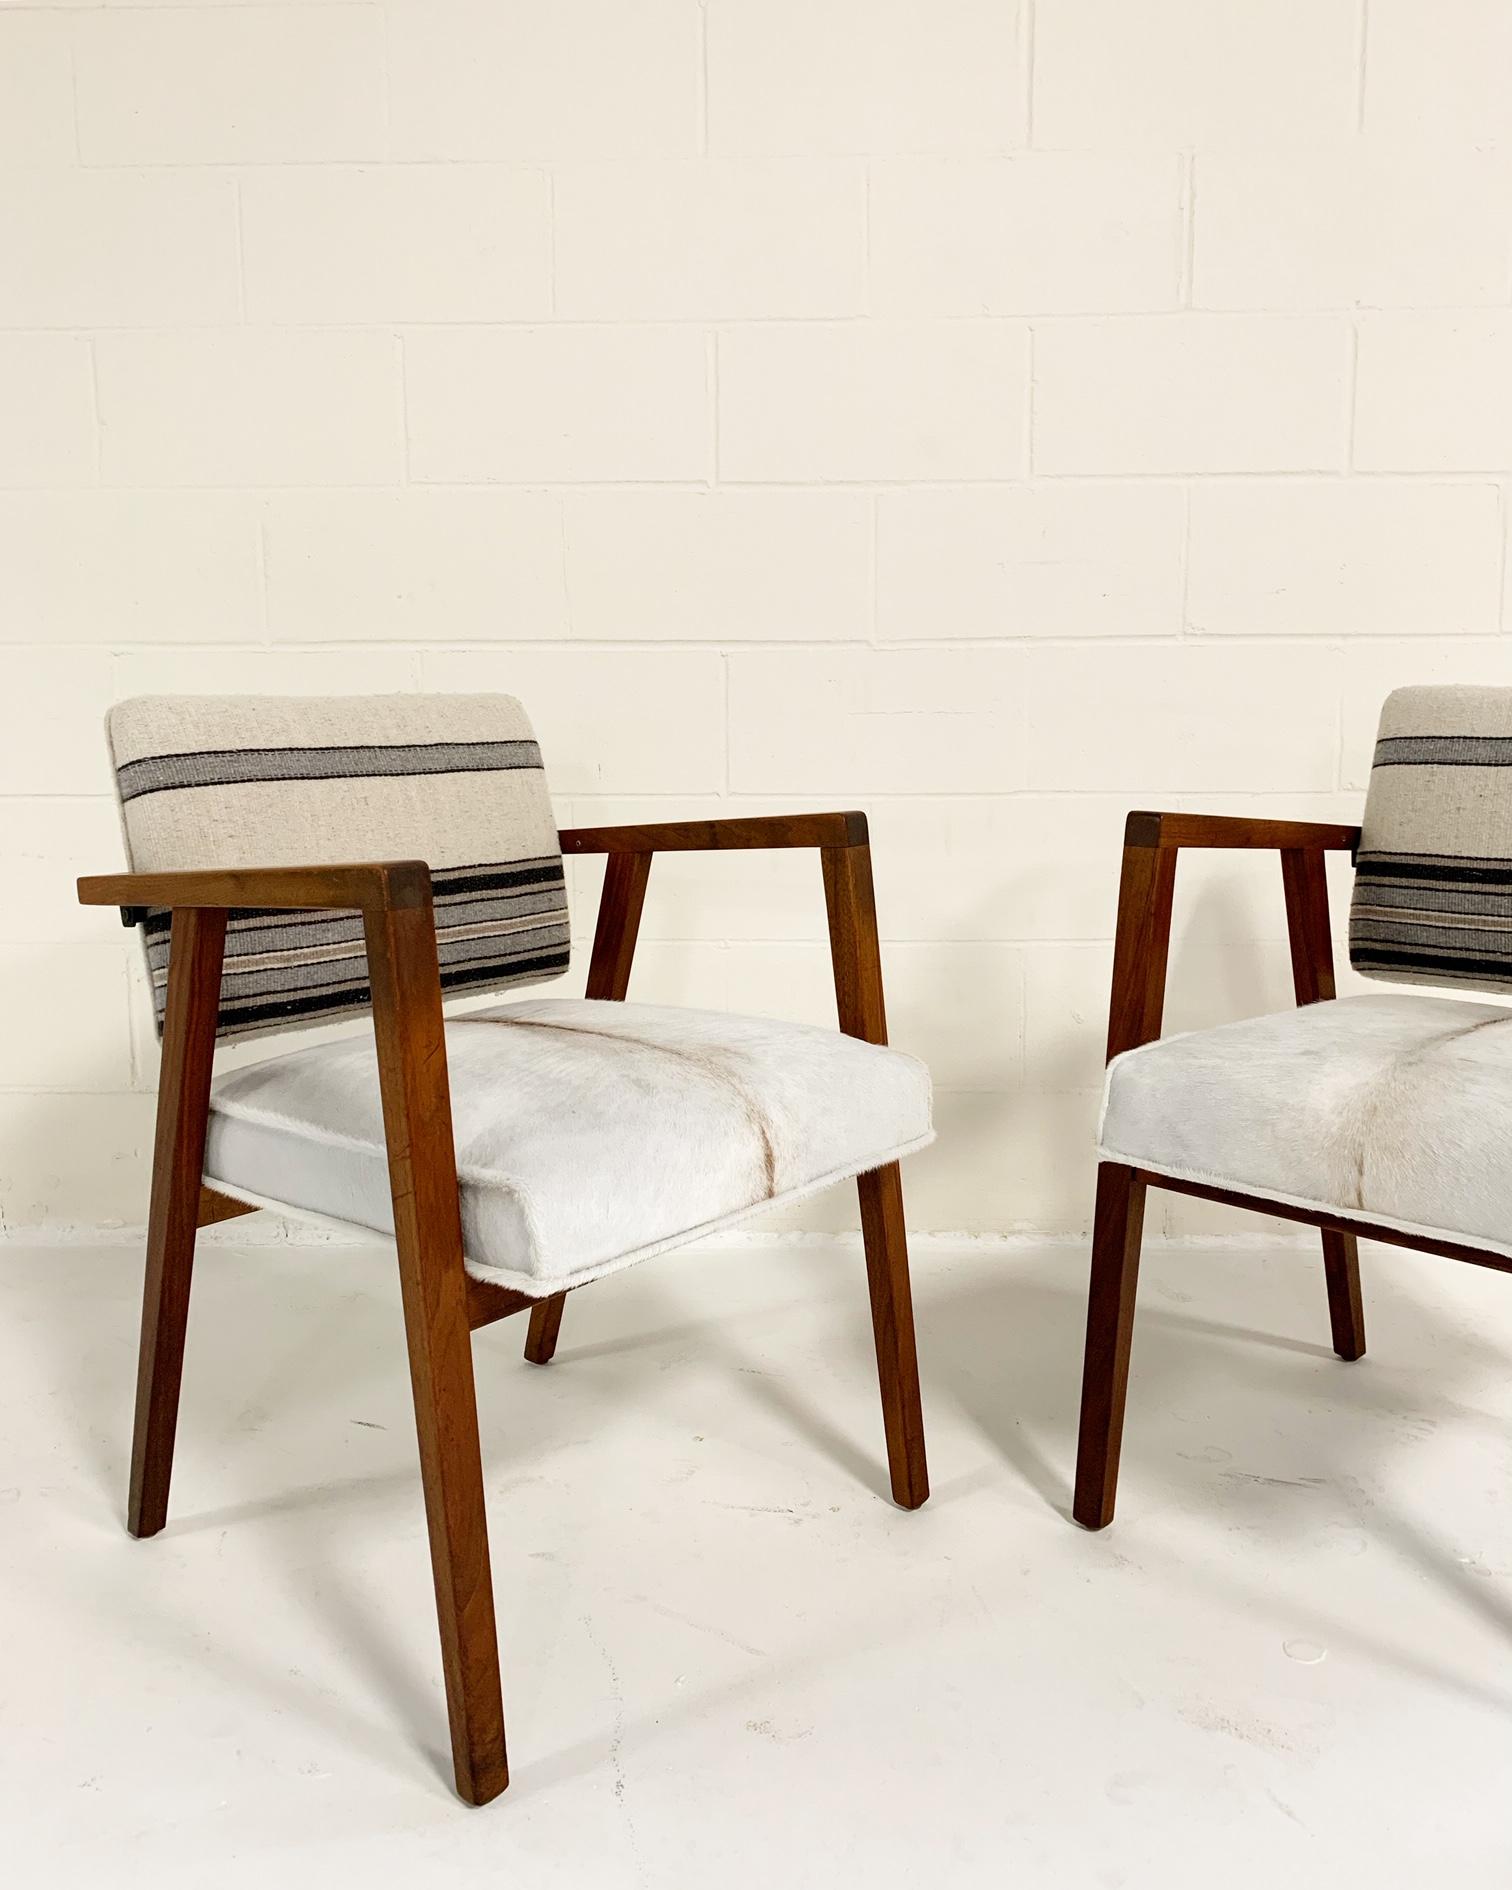 Cowhide Franco Albini for Knoll Model 48 Chairs in Calfskin and Isabel Marant Silk Wool